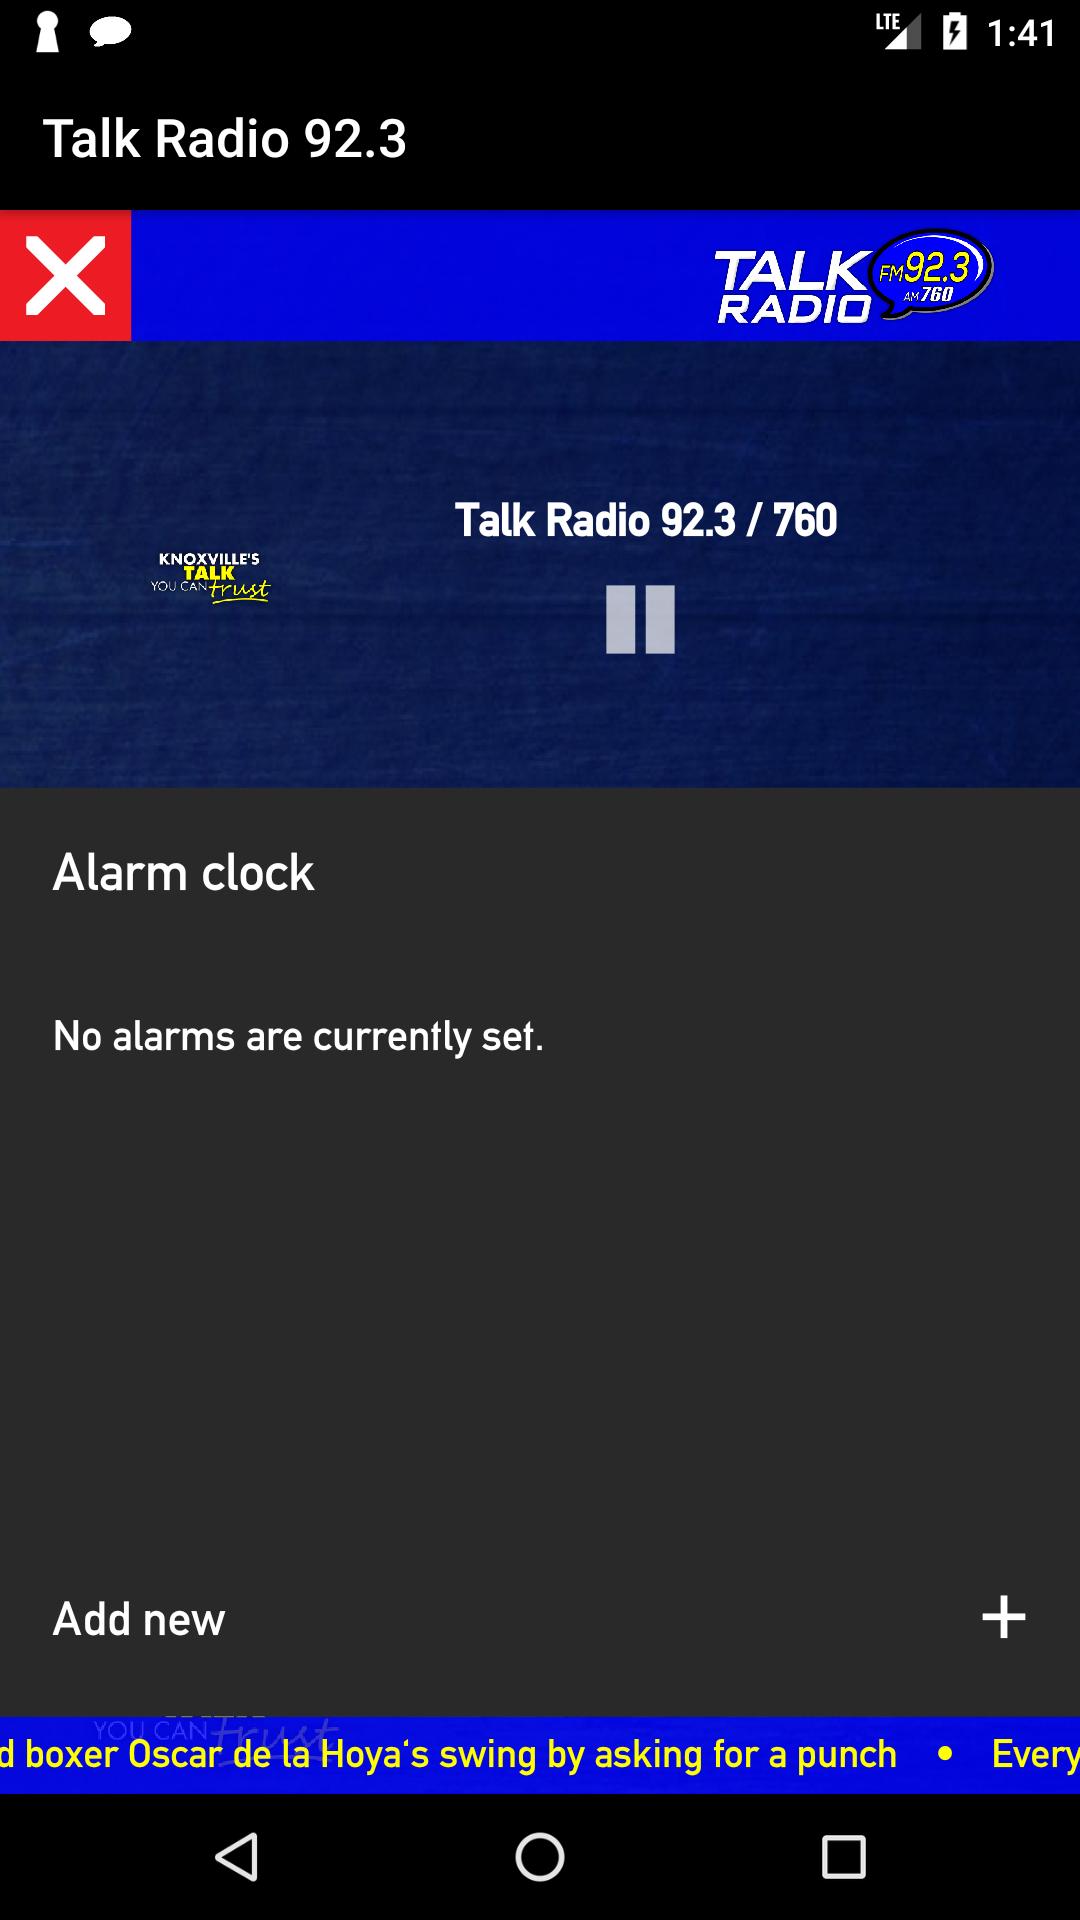 Talk Radio 92.3 for Android - APK Download